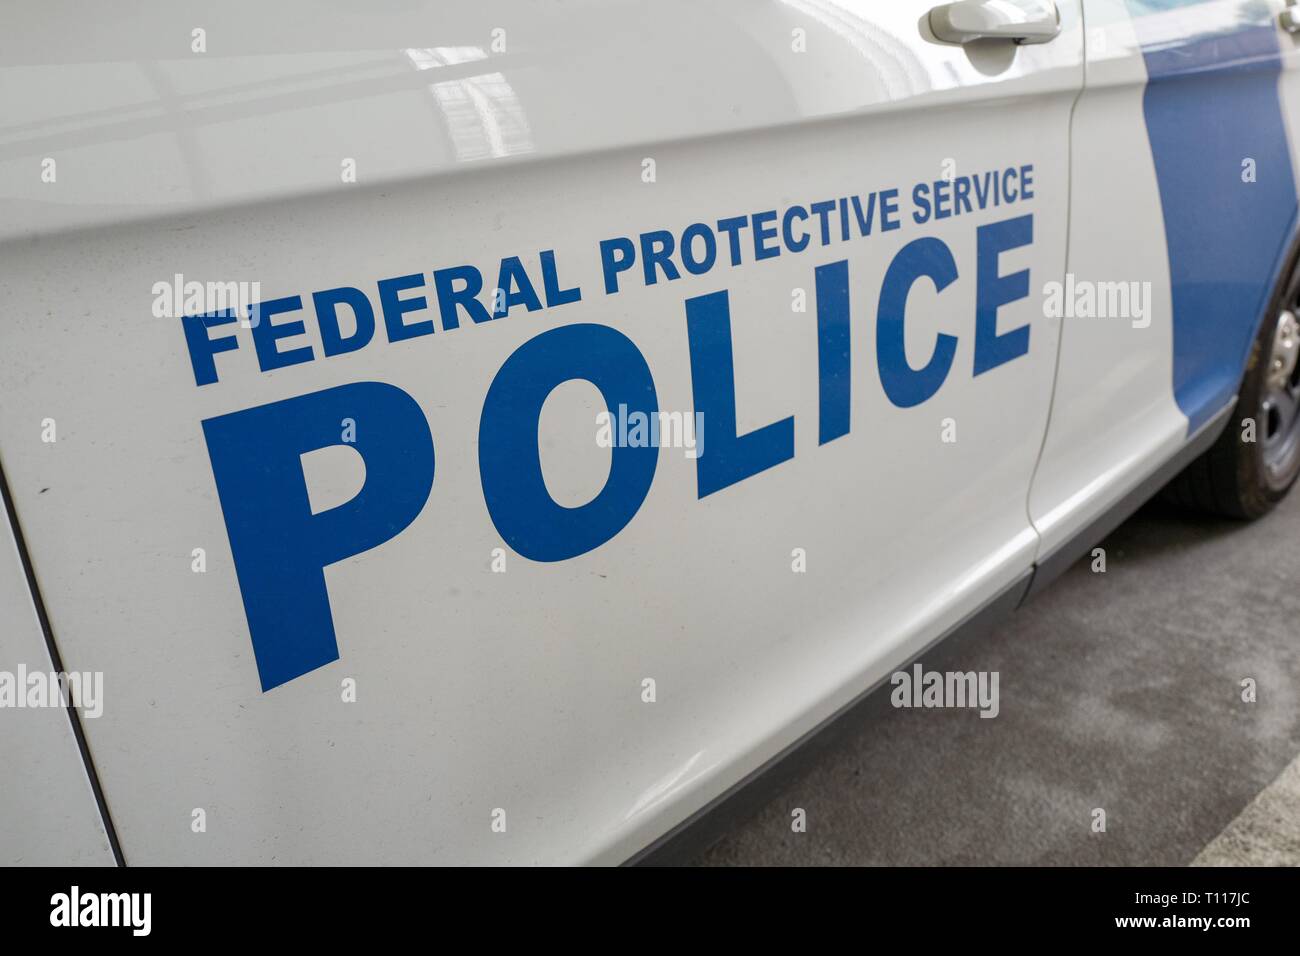 Close-up of text reading Federal Protective Service Police on the side of a police vehicle in San Francisco, California, February 25, 2019. () Stock Photo